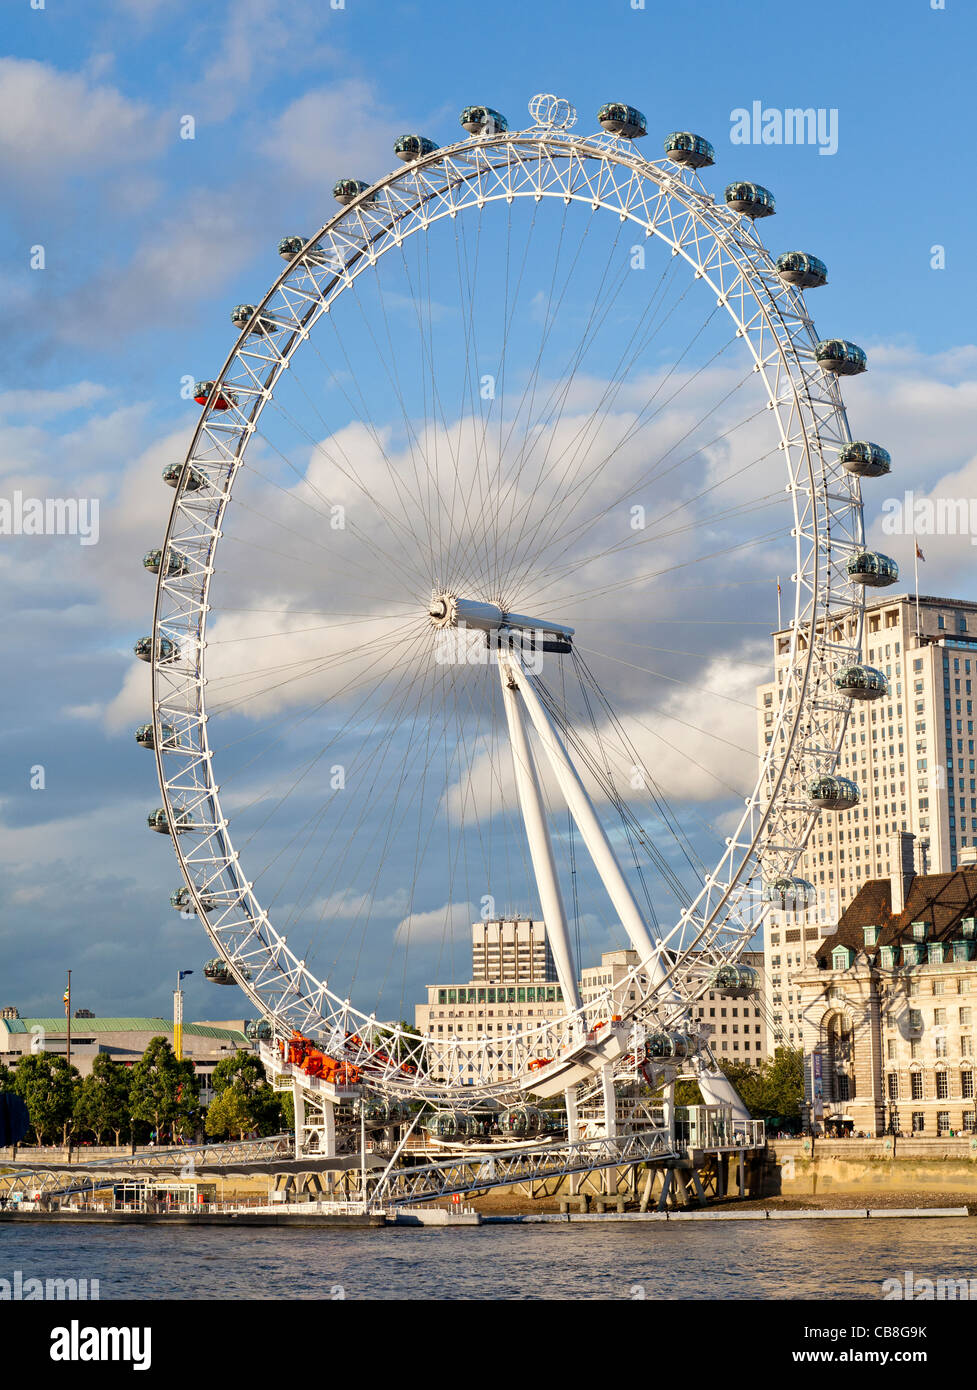 An evening image of the London Eye. Stock Photo